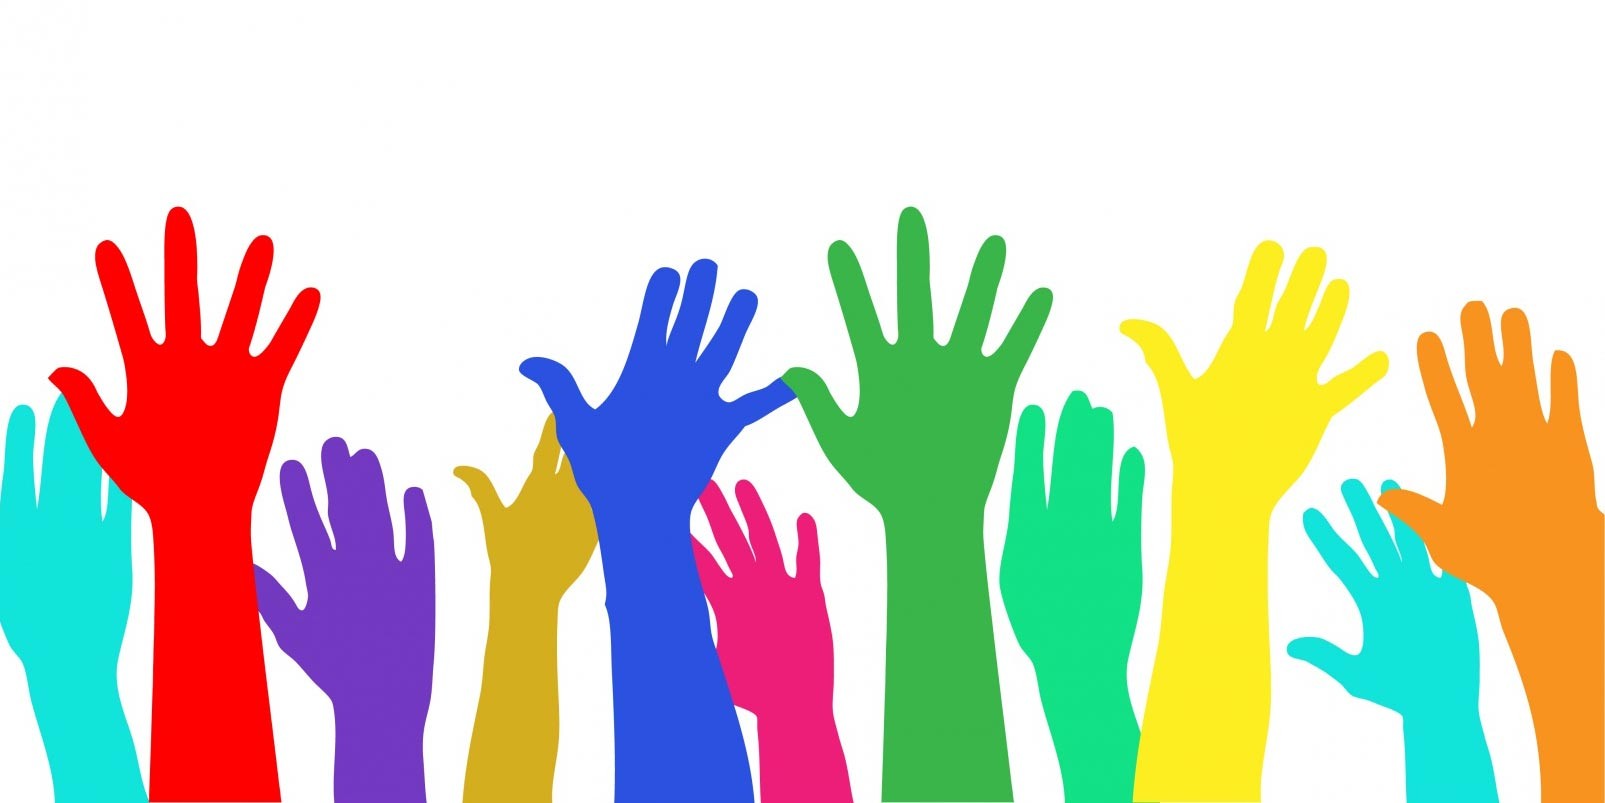 Image of raised colorful hands.